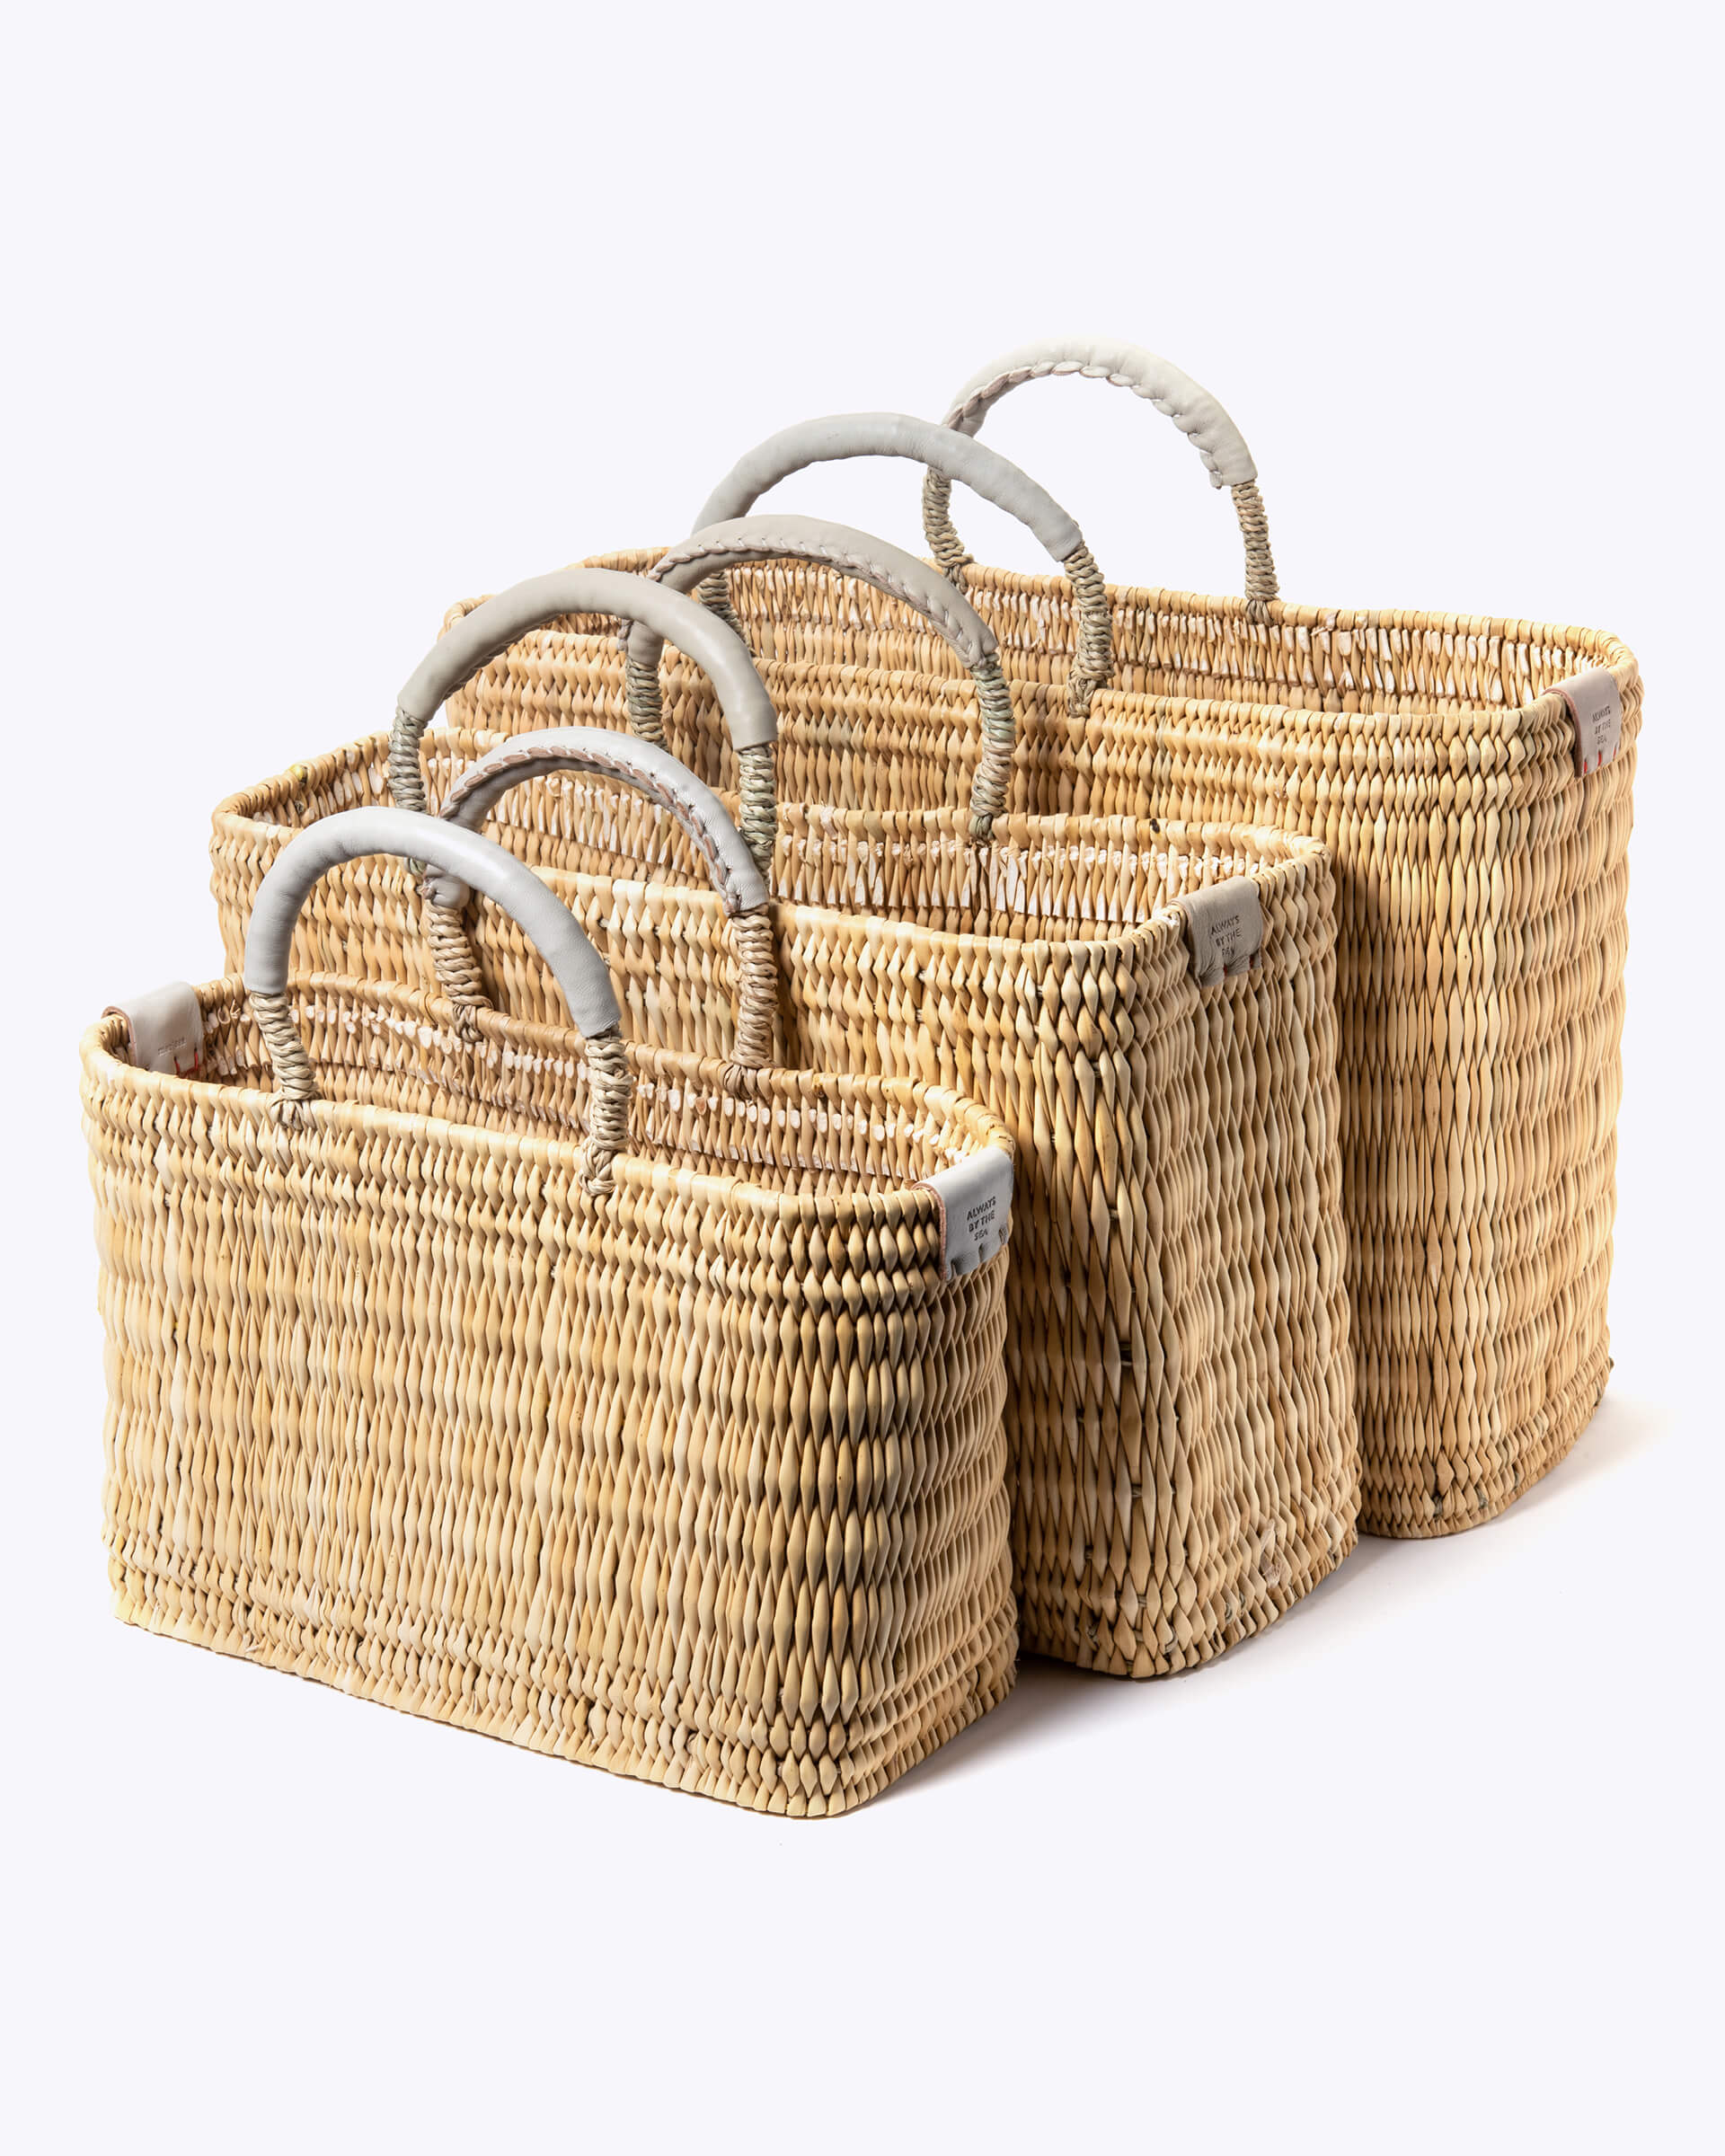 small, medium, large straw basket wrapped with neutral leather handles on white background